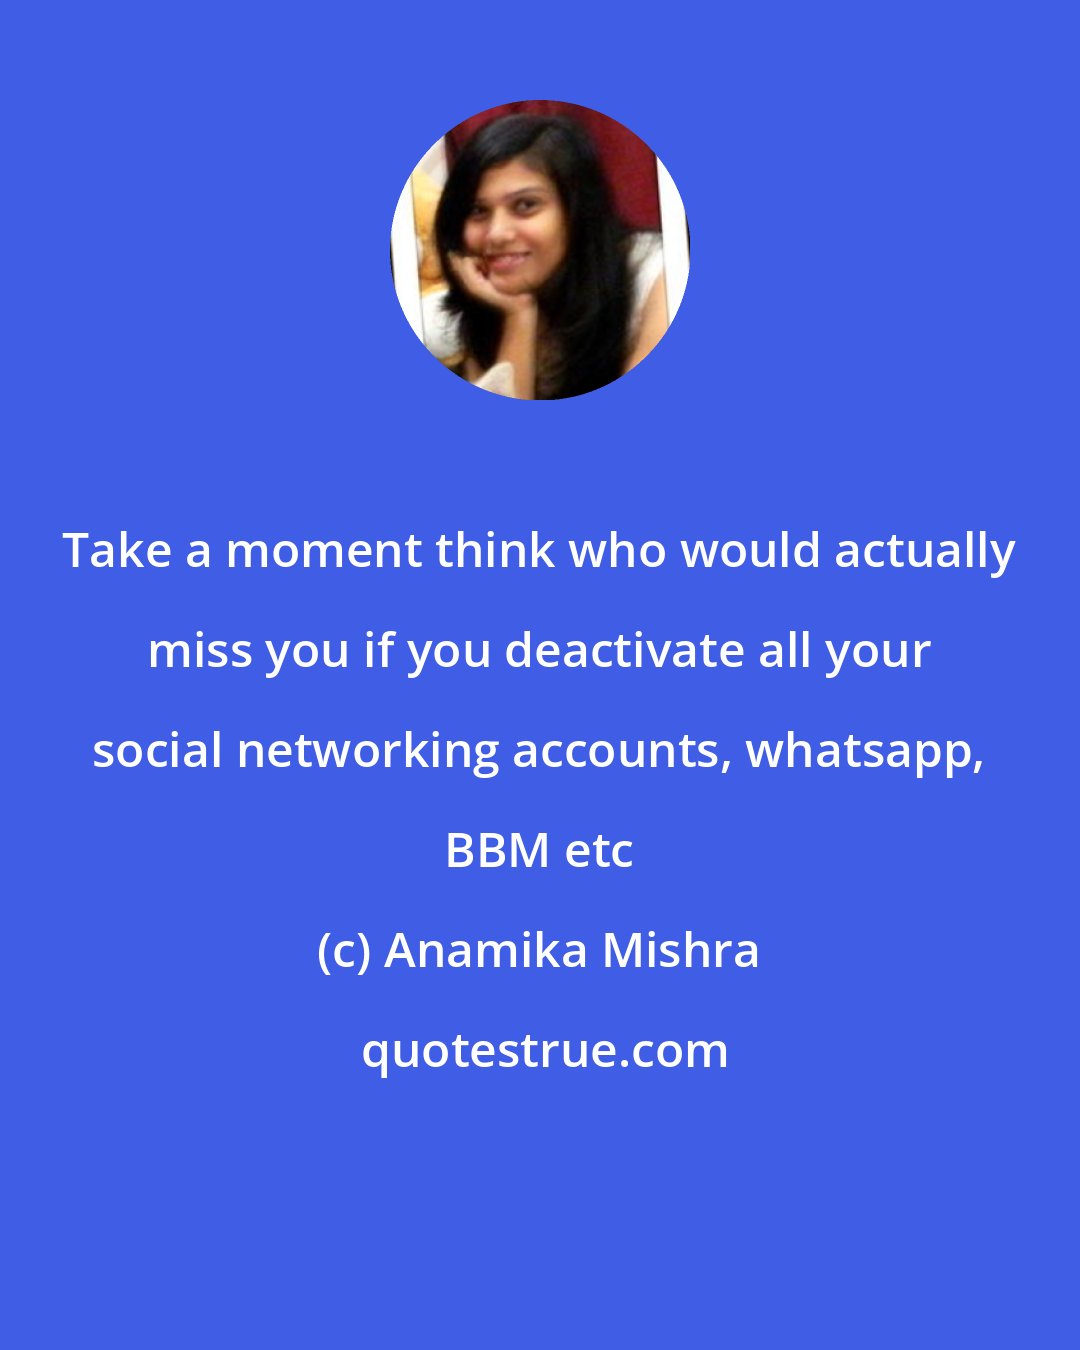 Anamika Mishra: Take a moment think who would actually miss you if you deactivate all your social networking accounts, whatsapp, BBM etc